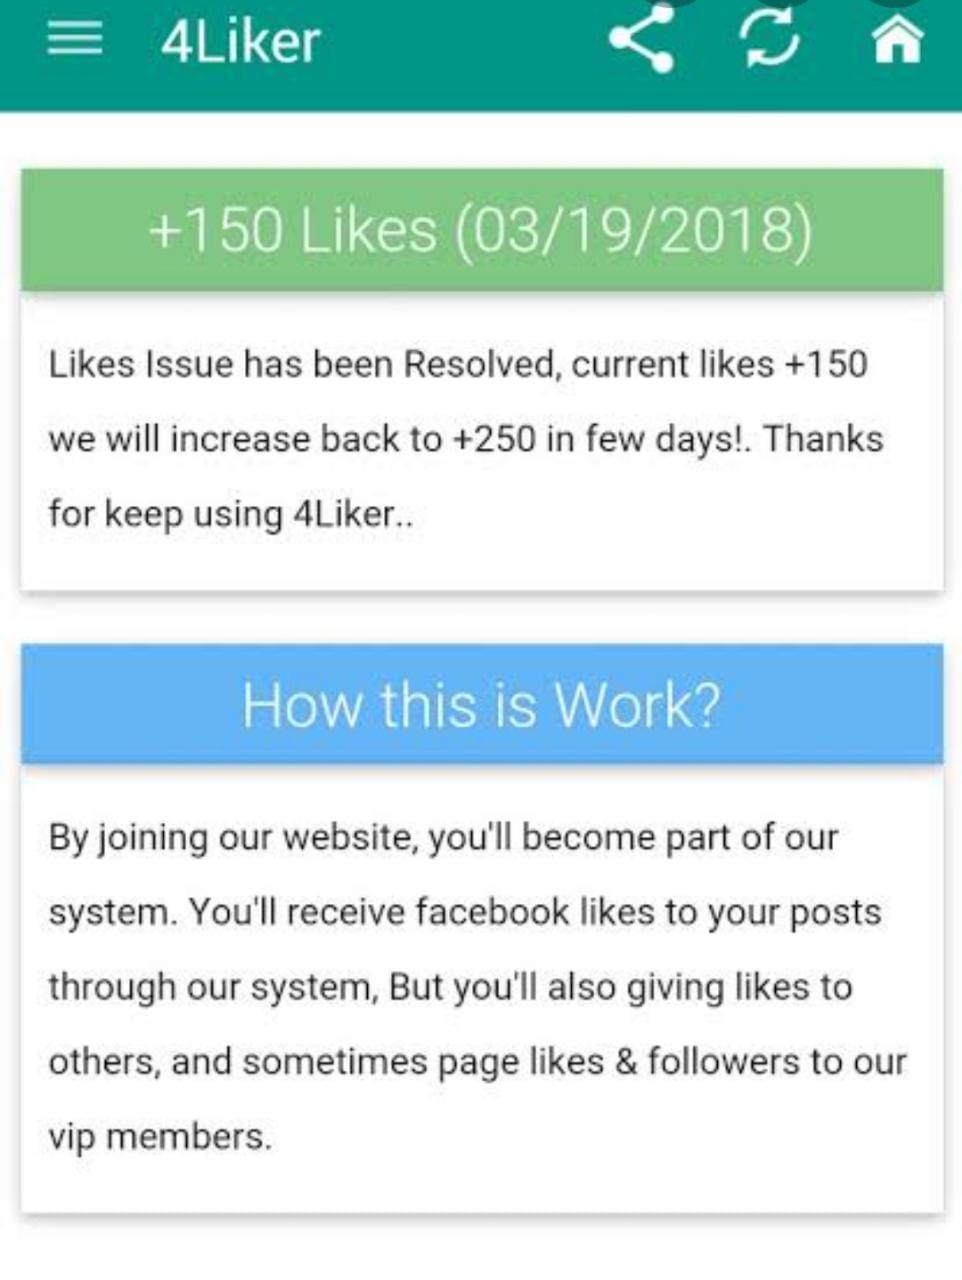 4Liker APK Download – Latest For Android 2021 2